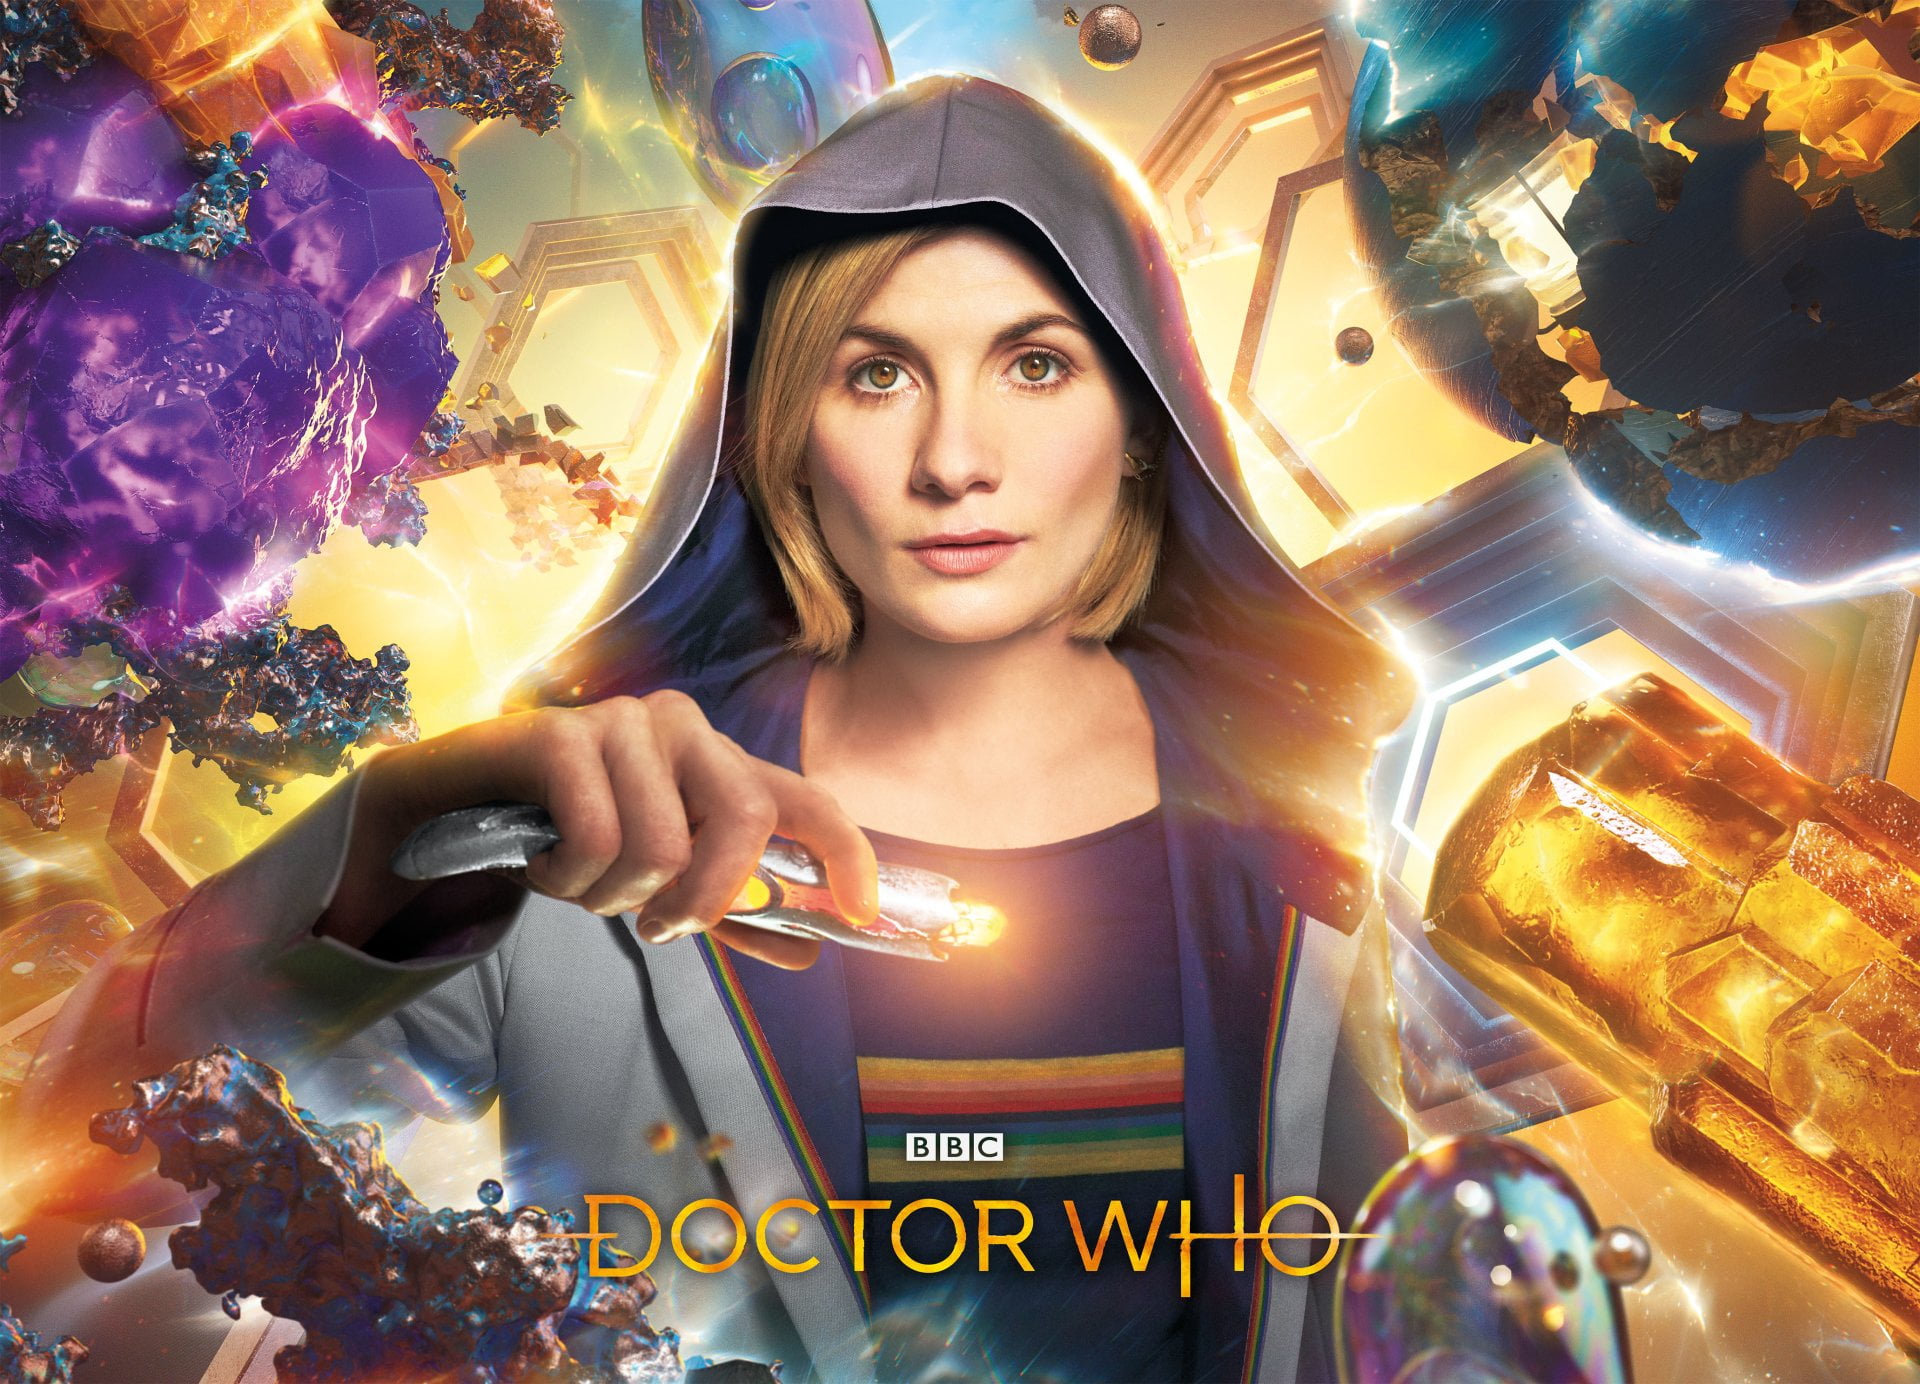 TV Show, Doctor Who, 13th Doctor, Jodie Whittaker, one person